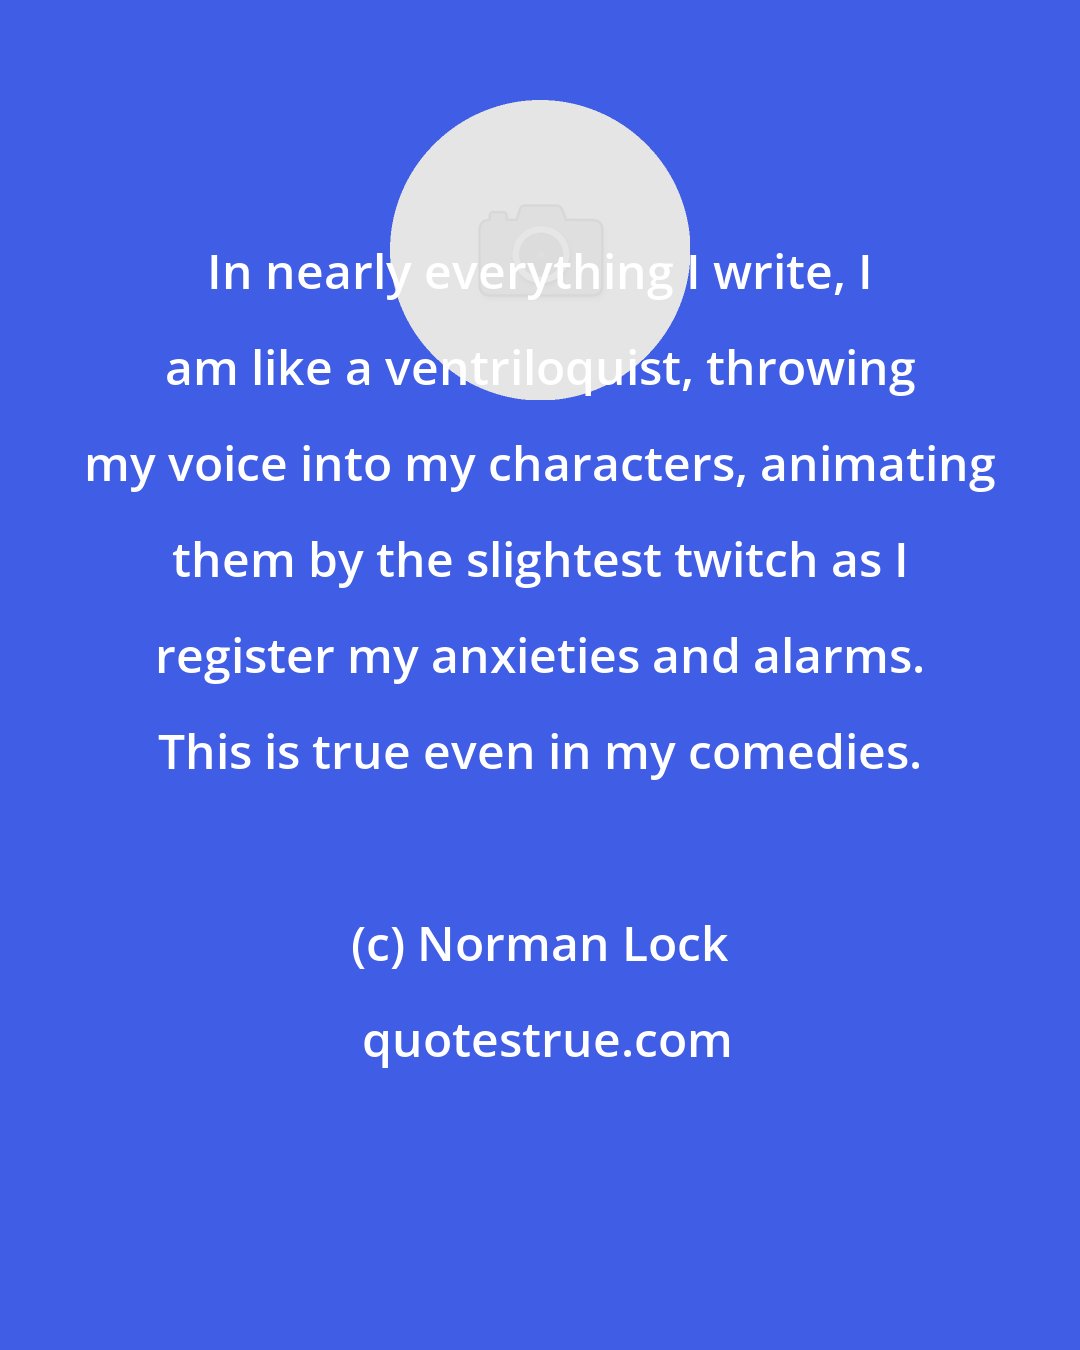 Norman Lock: In nearly everything I write, I am like a ventriloquist, throwing my voice into my characters, animating them by the slightest twitch as I register my anxieties and alarms. This is true even in my comedies.